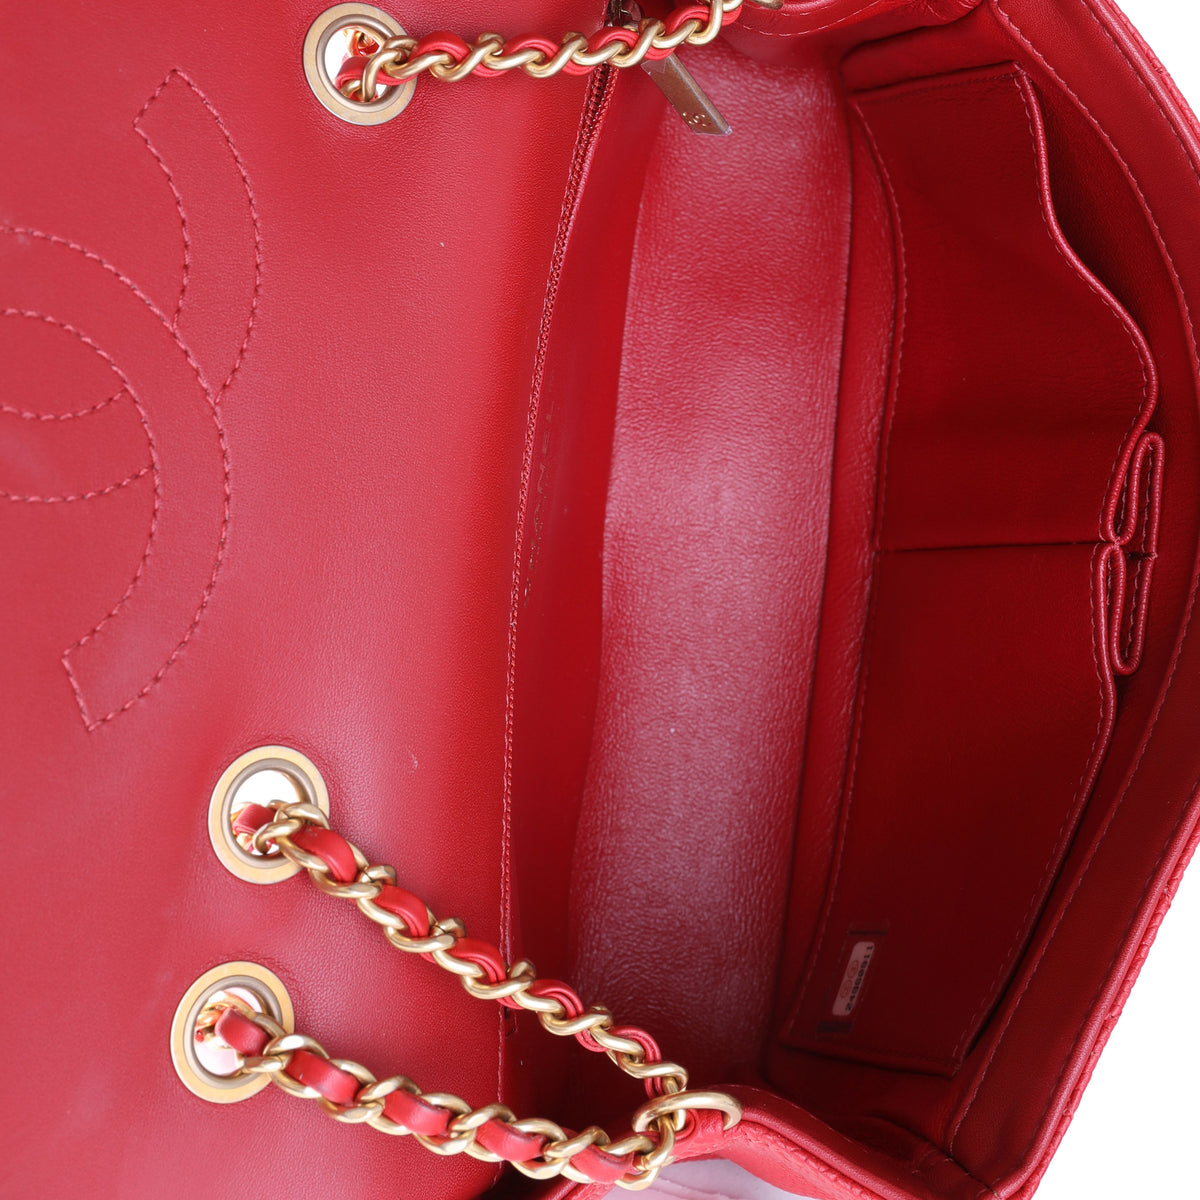 Chanel Red Caviar Quilted Small CC Filigree Flap Bag